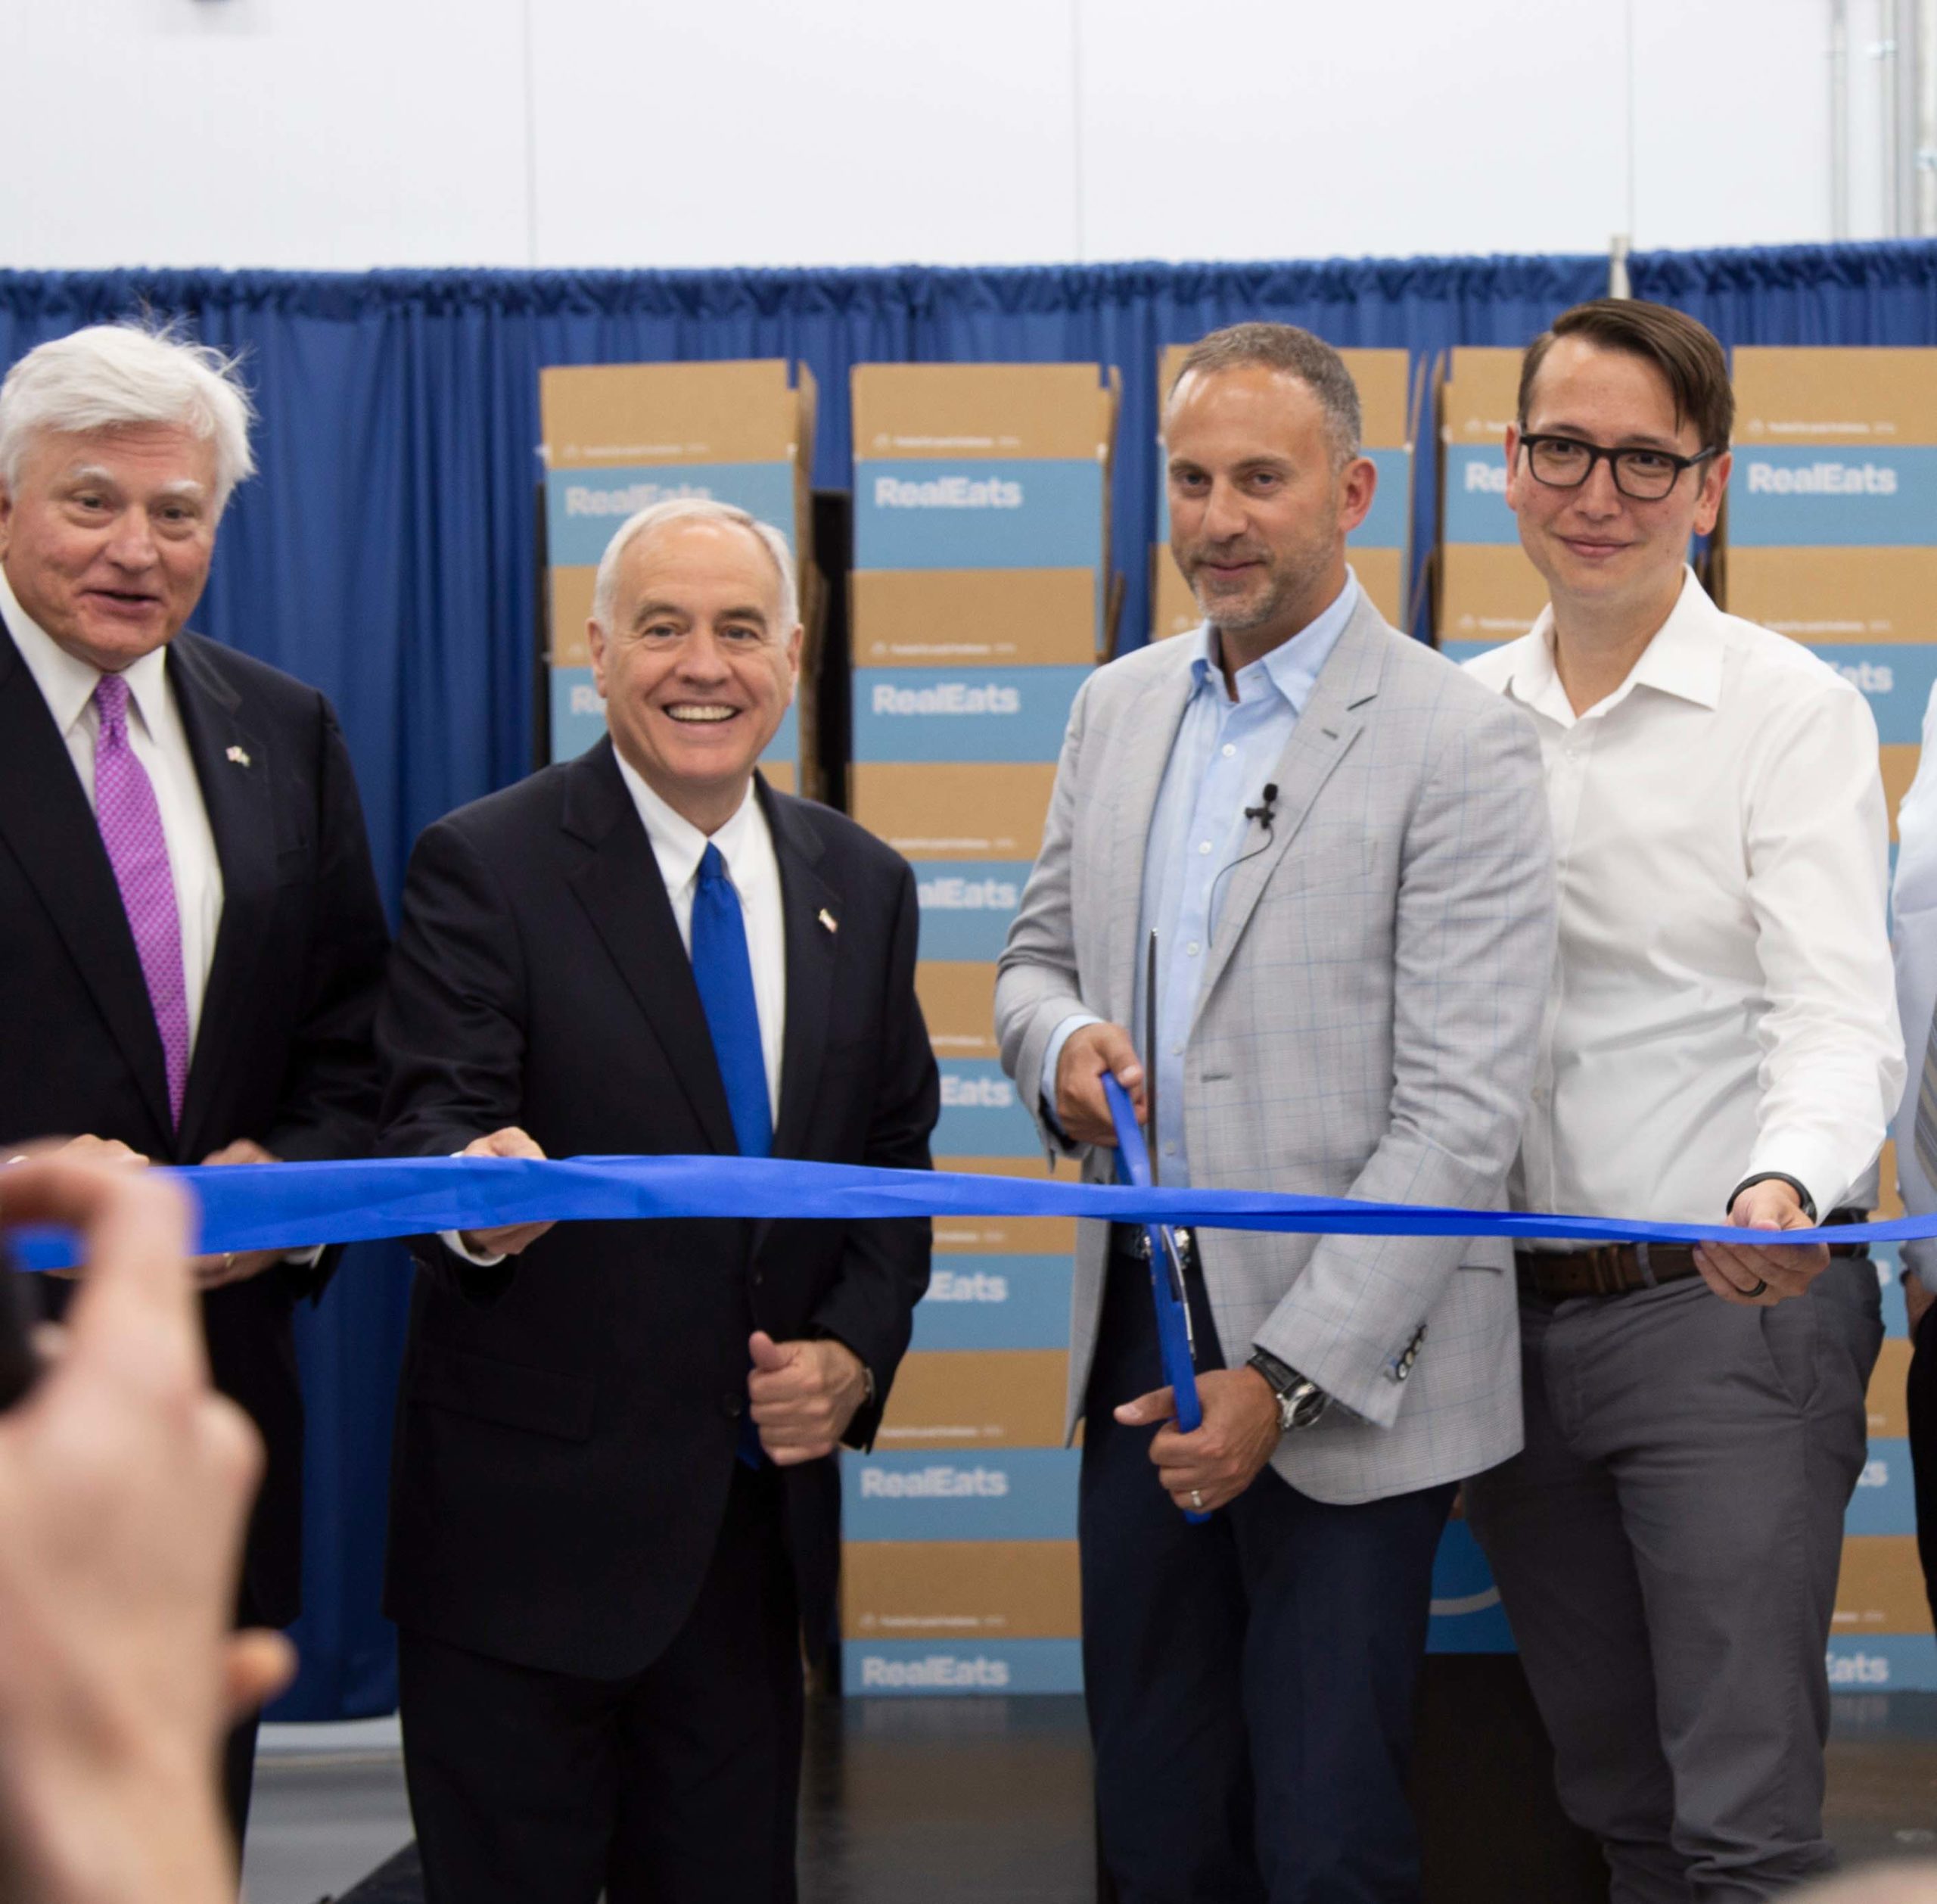 Mike Nizzolio, Tom DiNapoli, Dan Wise and Eric from the RealEats team cut a ceremonial ribbon